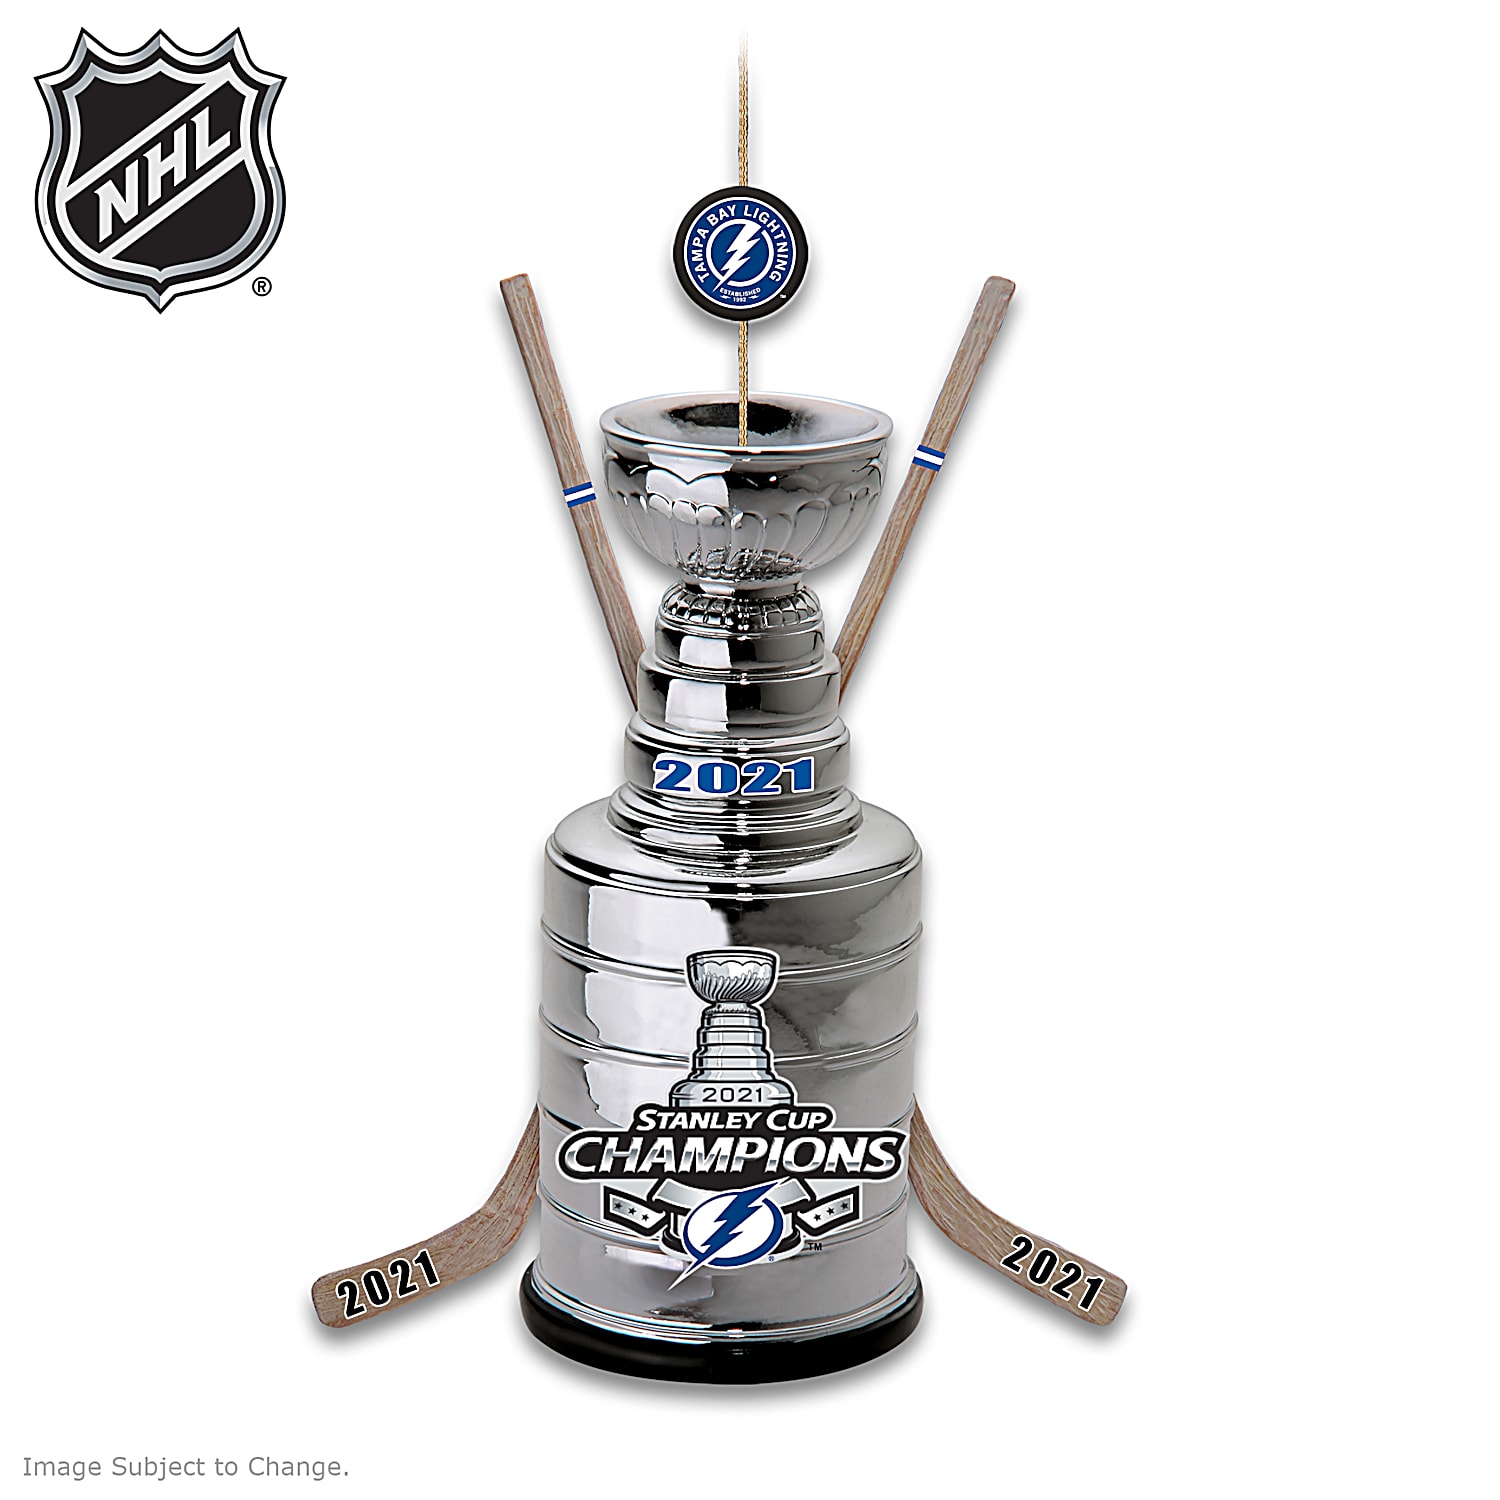 Tampa Bay Lightning are 2021 Stanley Cup Champions: Where to buy